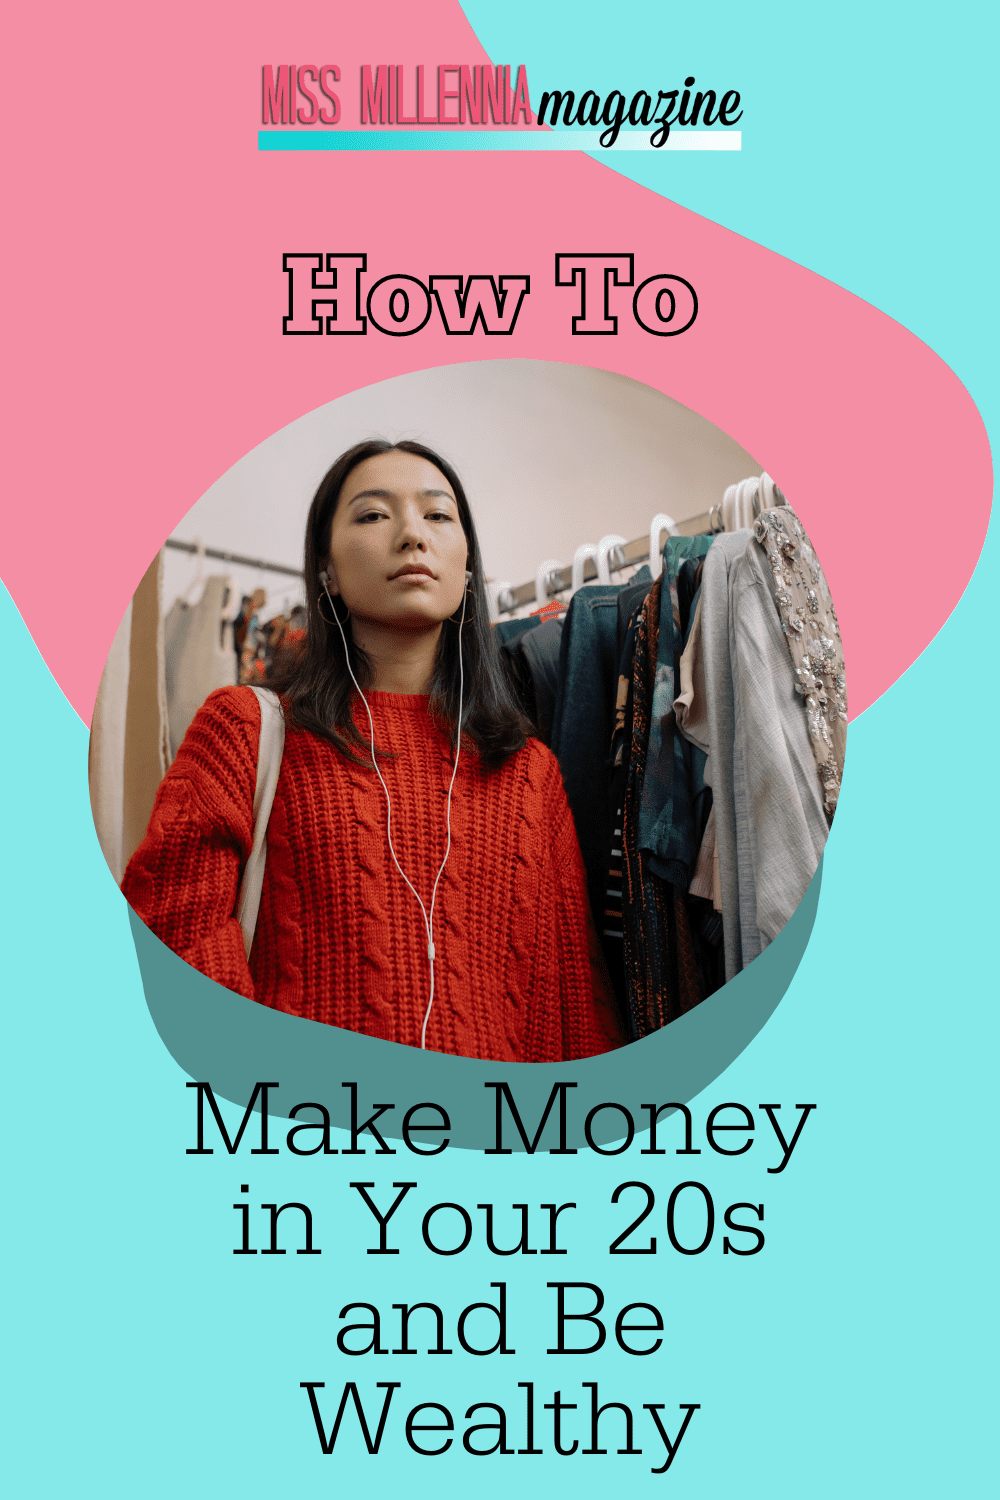 21 Ways to Make Money in Your 20s and Be Wealthy